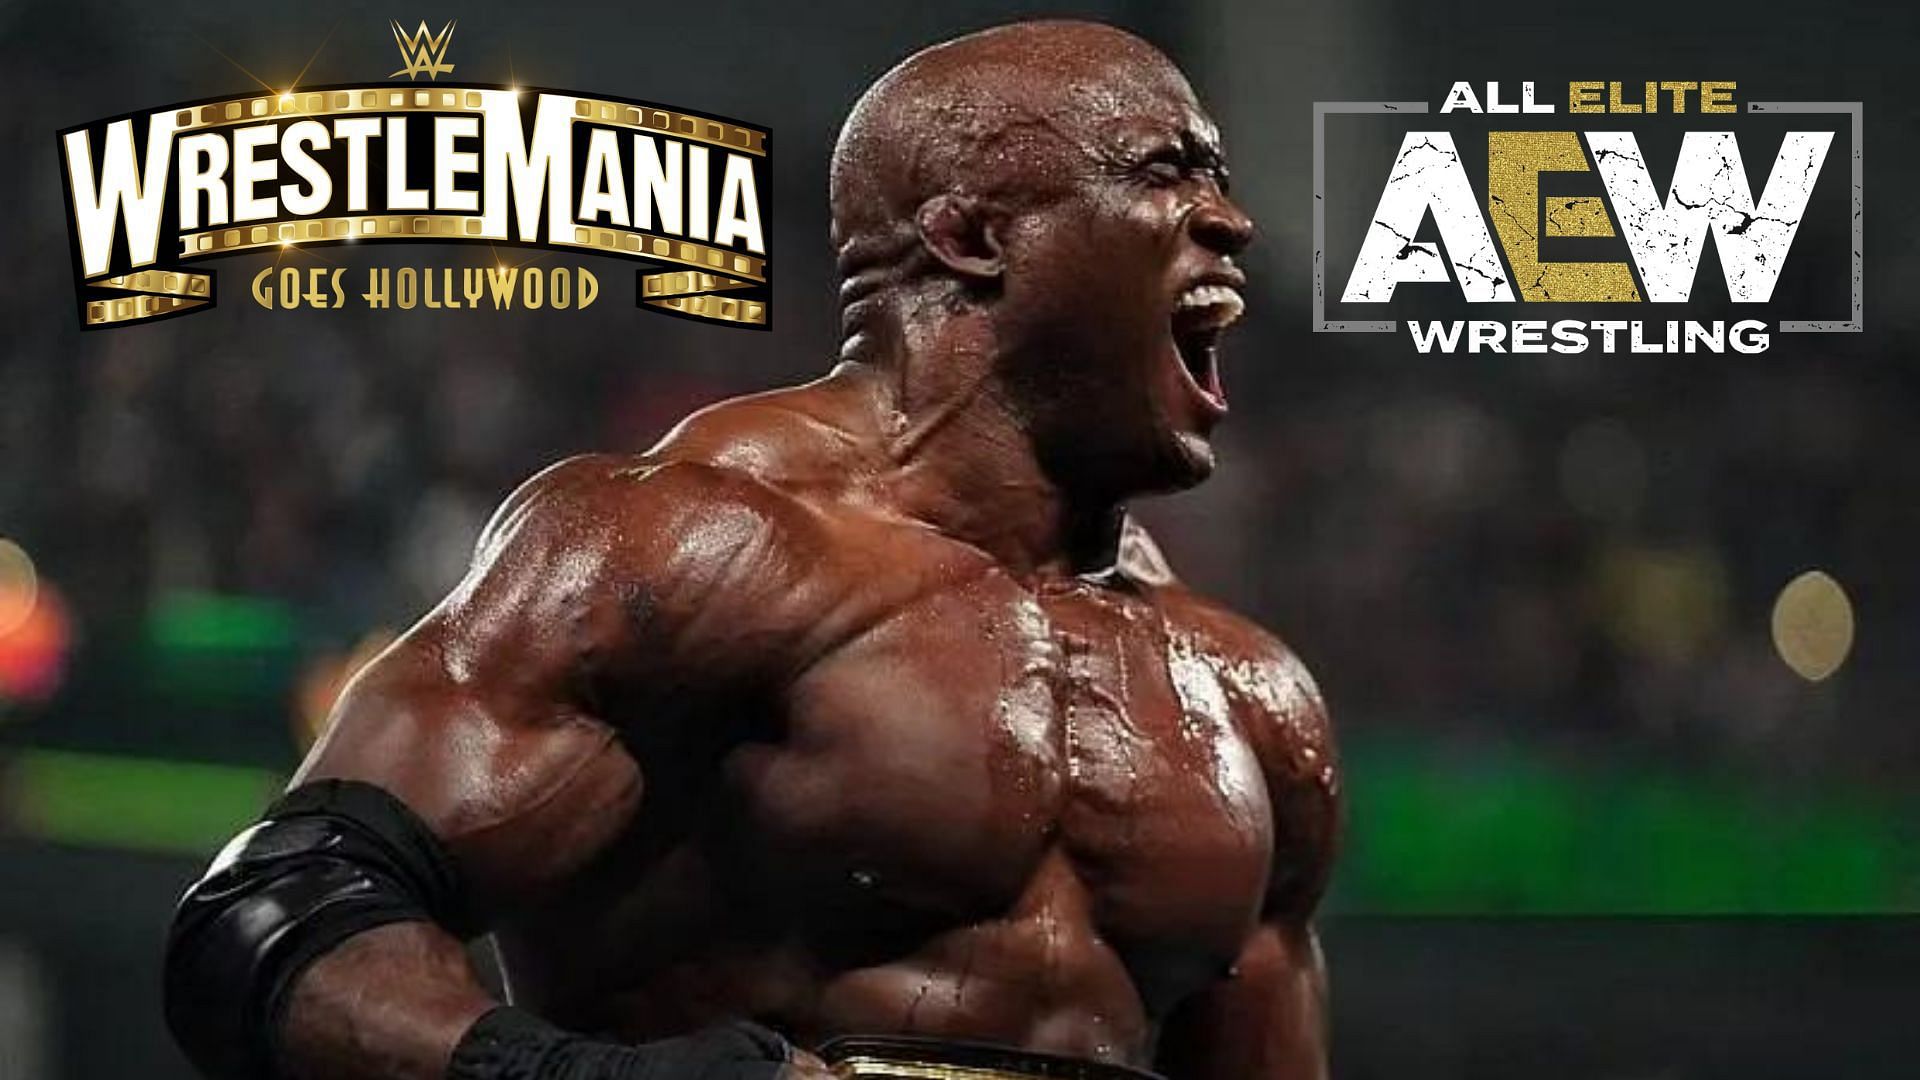 Bobby Lashley could turn heel if WWE brings back former AEW star after a 3-year absence at WrestleMania 39